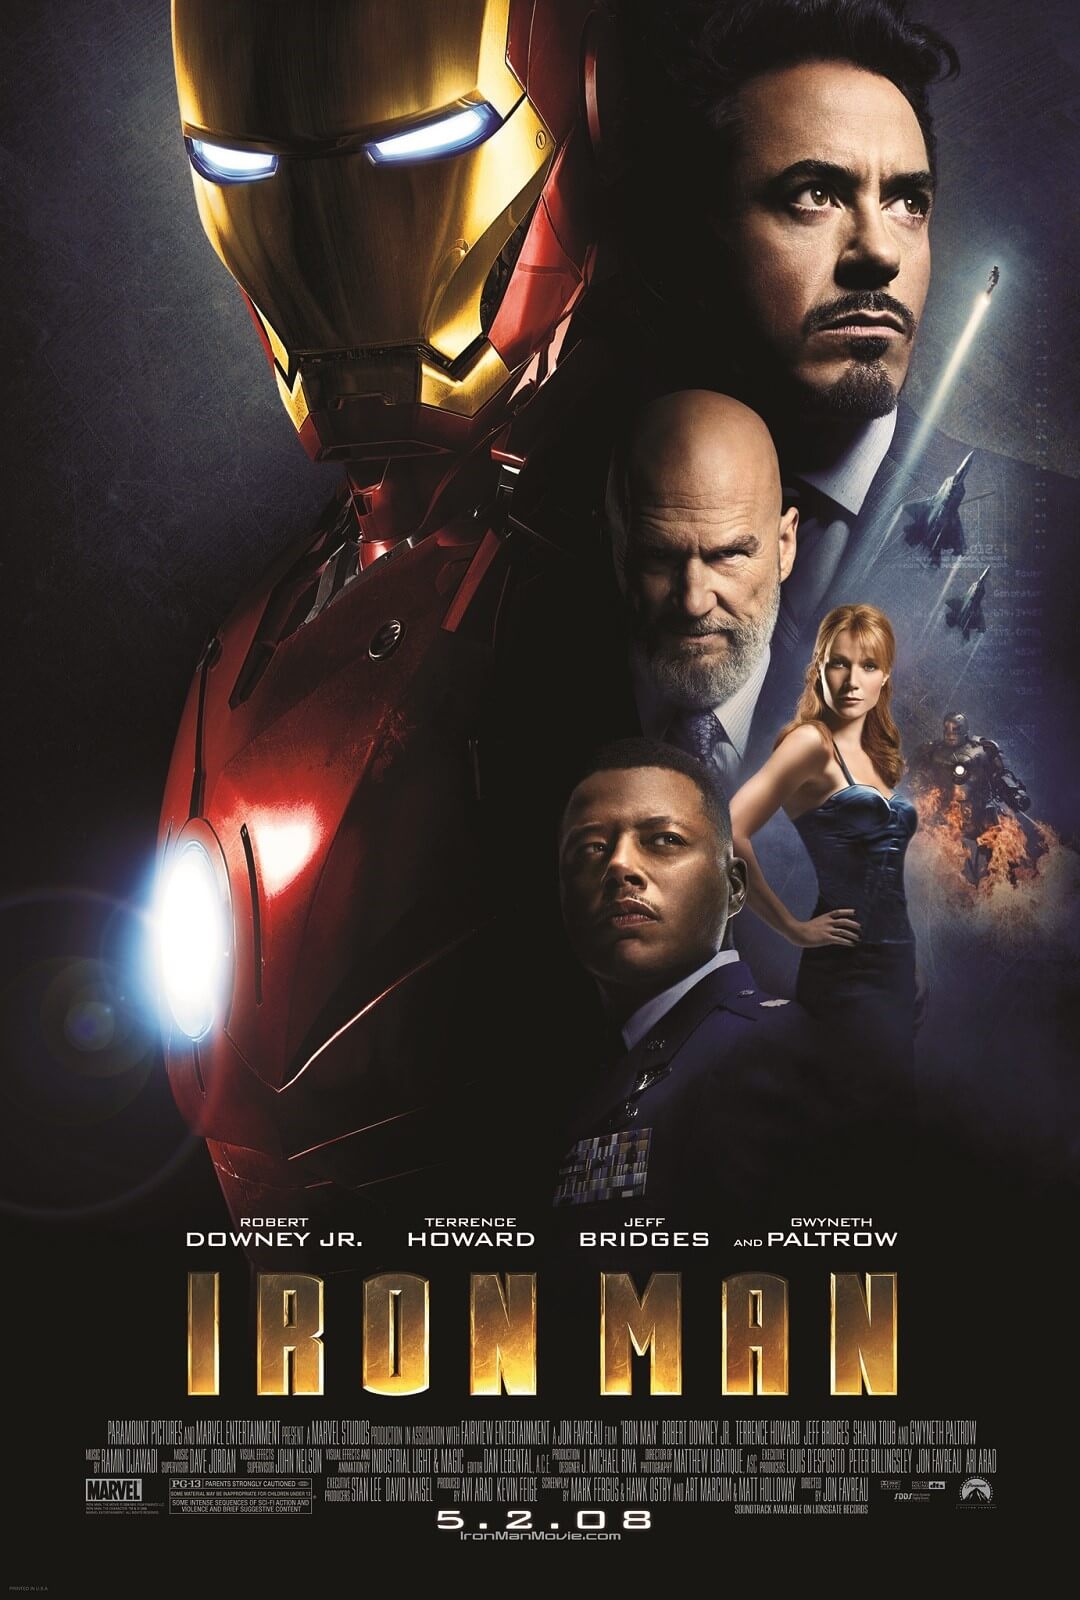 Download Iron Man (2008) Hindi Dubbed Movie In 720p, 1080p Movie